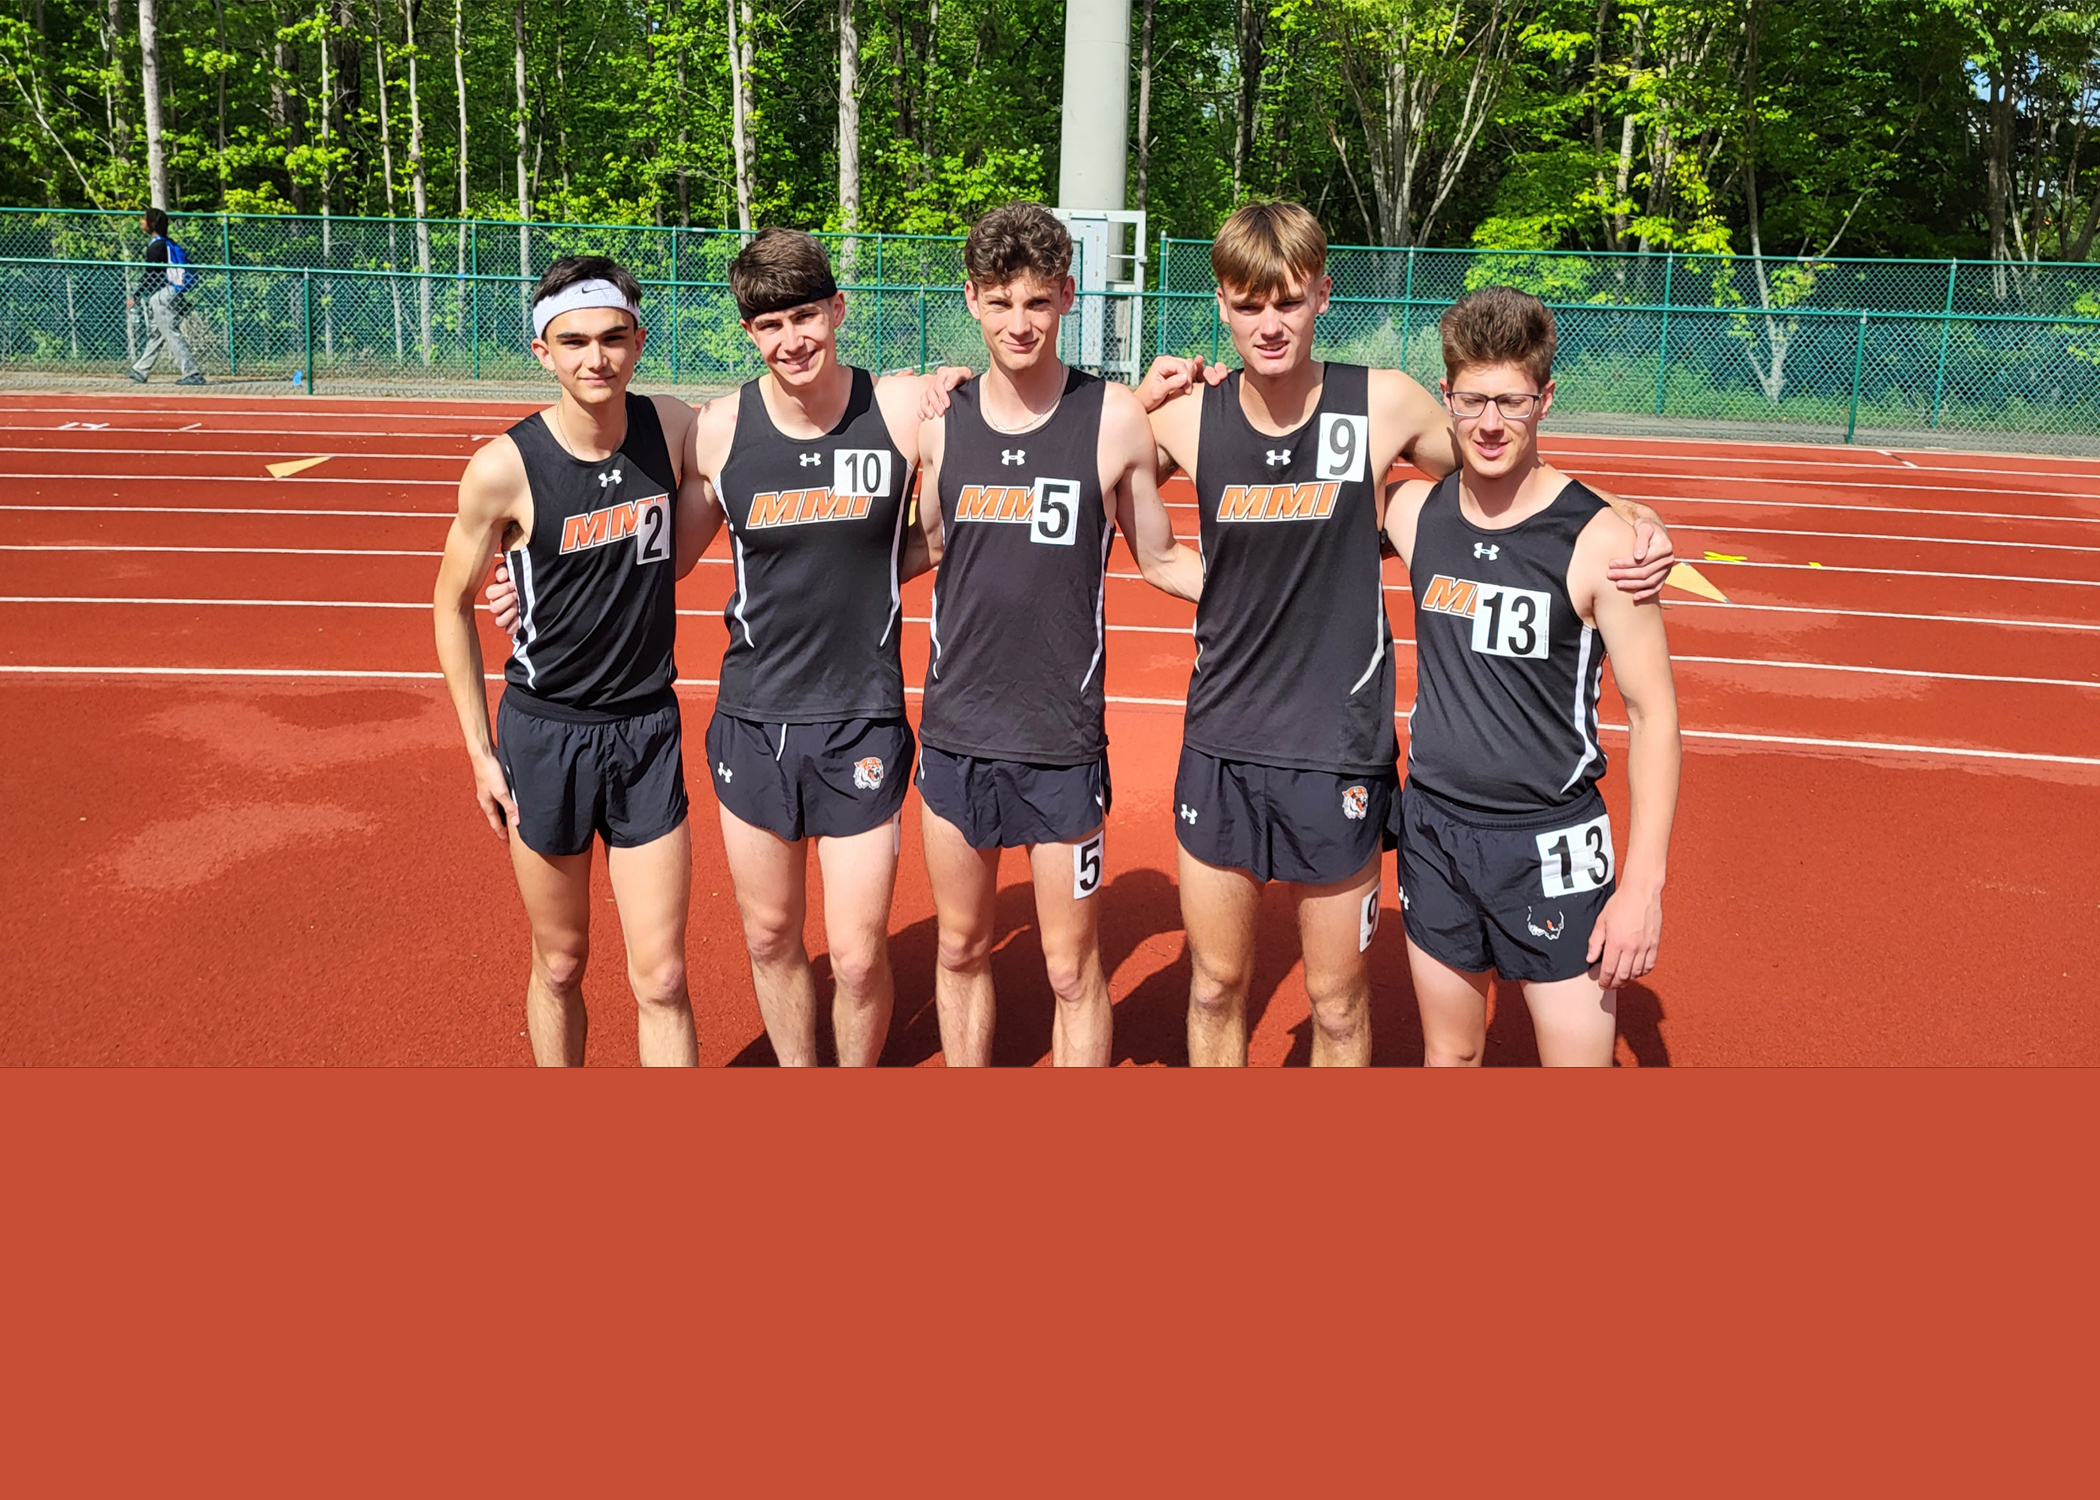 Tigers Have Good Showing at Running Eagles Open;Goth Wins 1500m